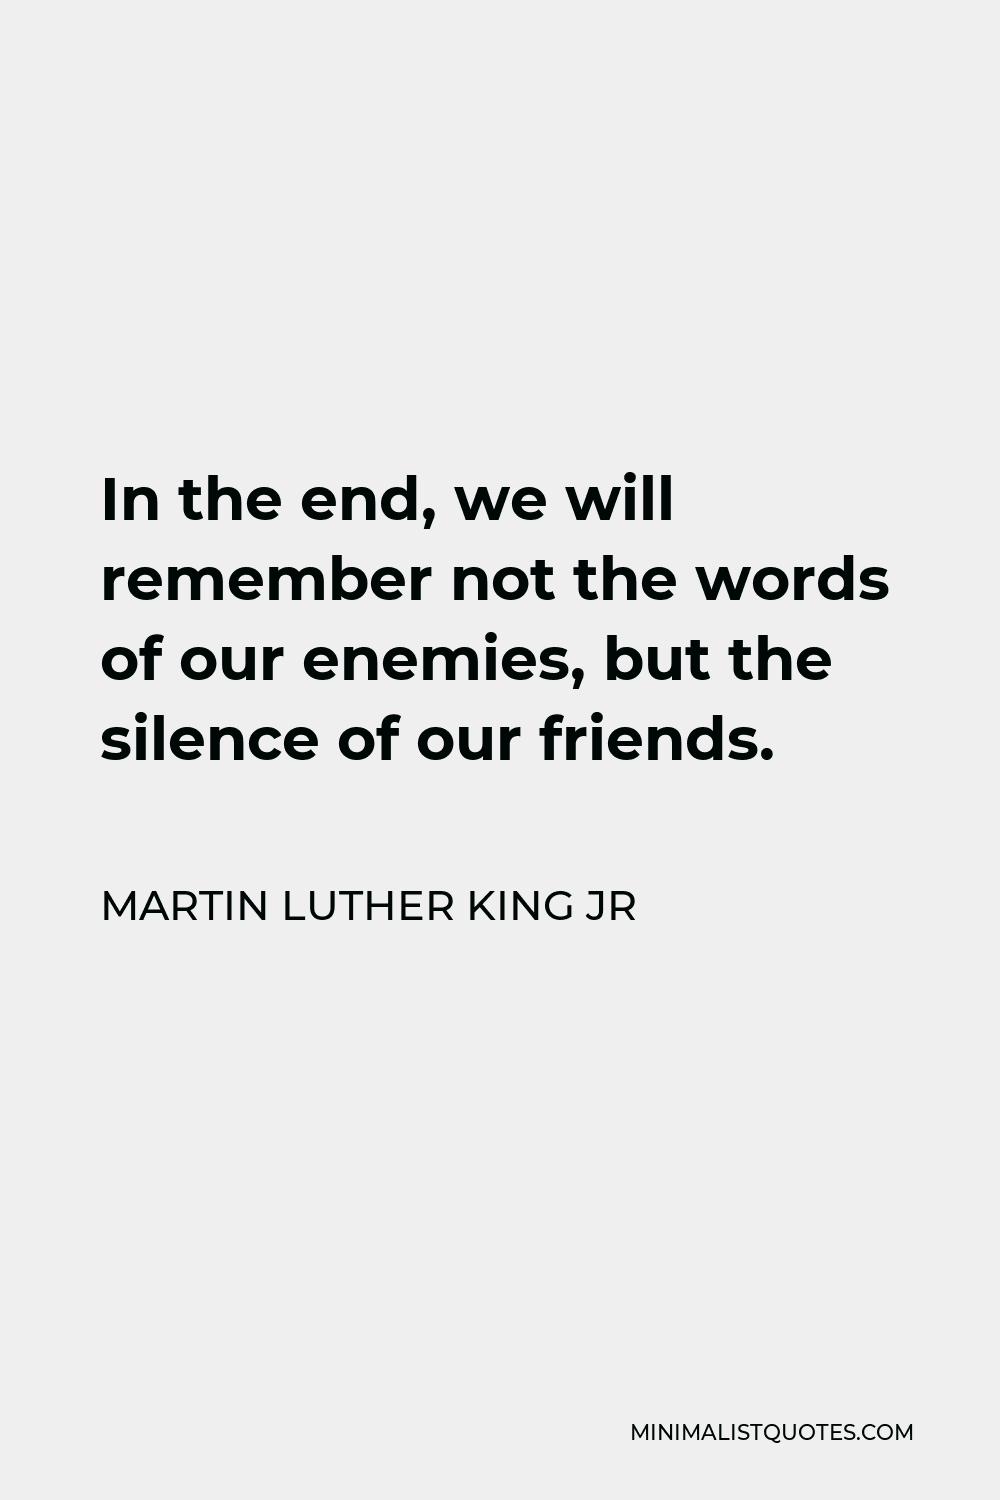 Martin Luther King Jr Quote - In the end, we will remember not the words of our enemies, but the silence of our friends.